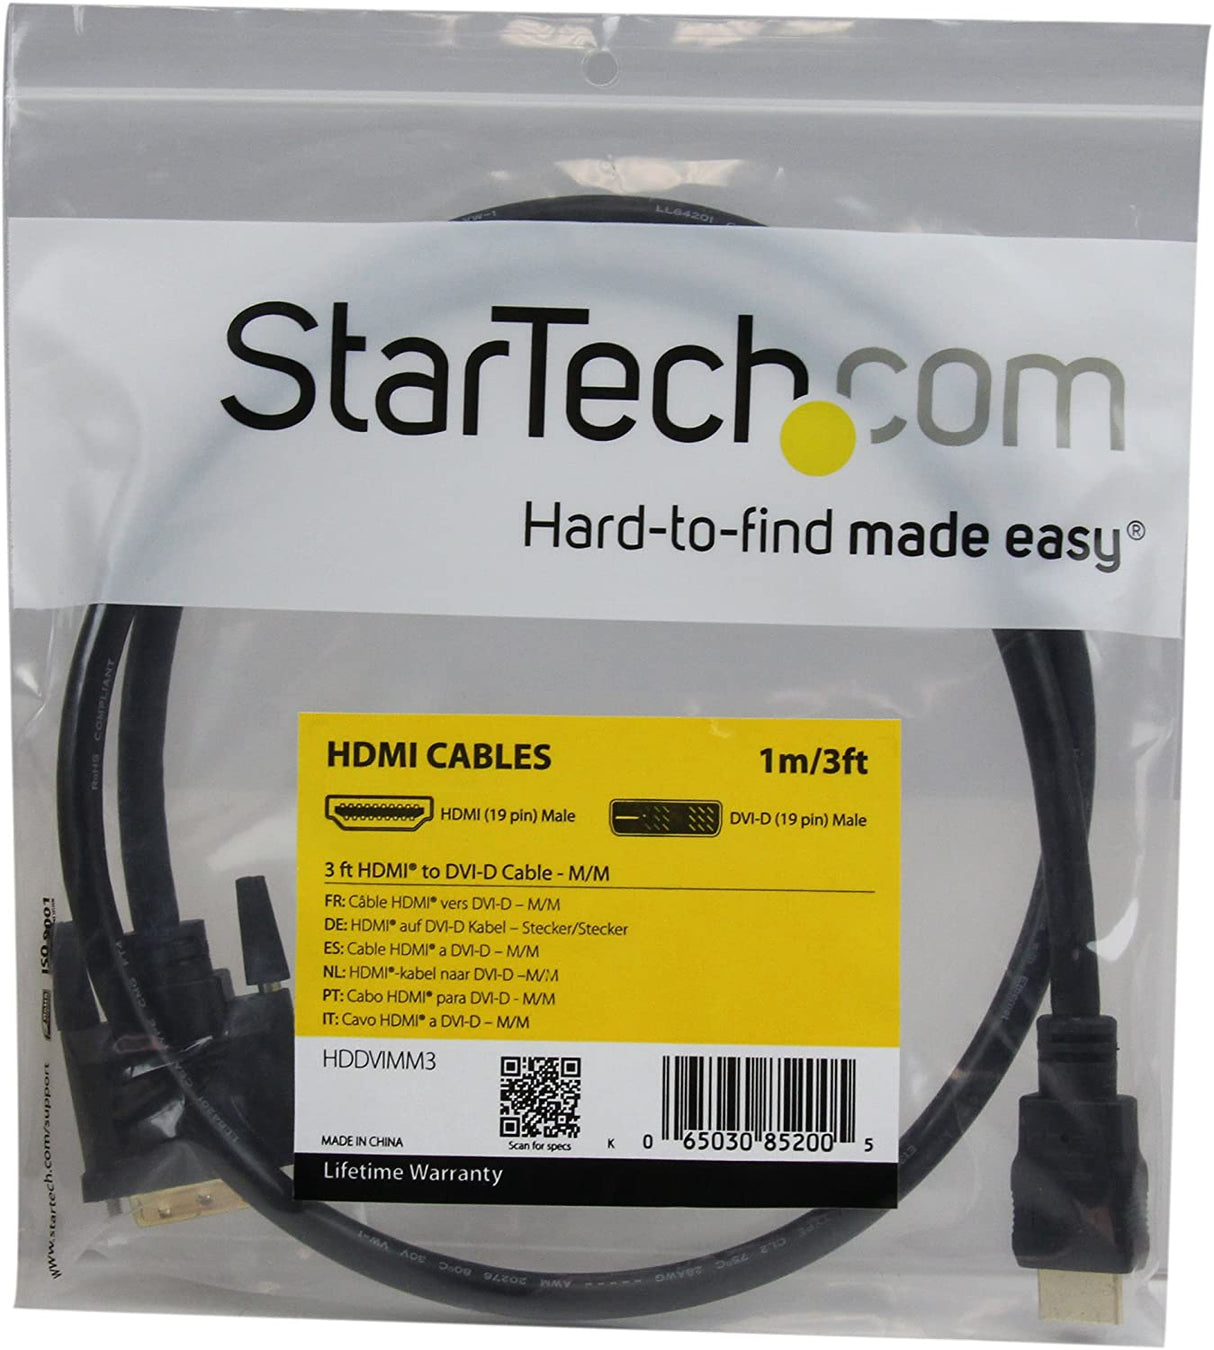 3ft (1m) Micro HDMI to DVI Cable Adapter - HDMI® Cables & HDMI